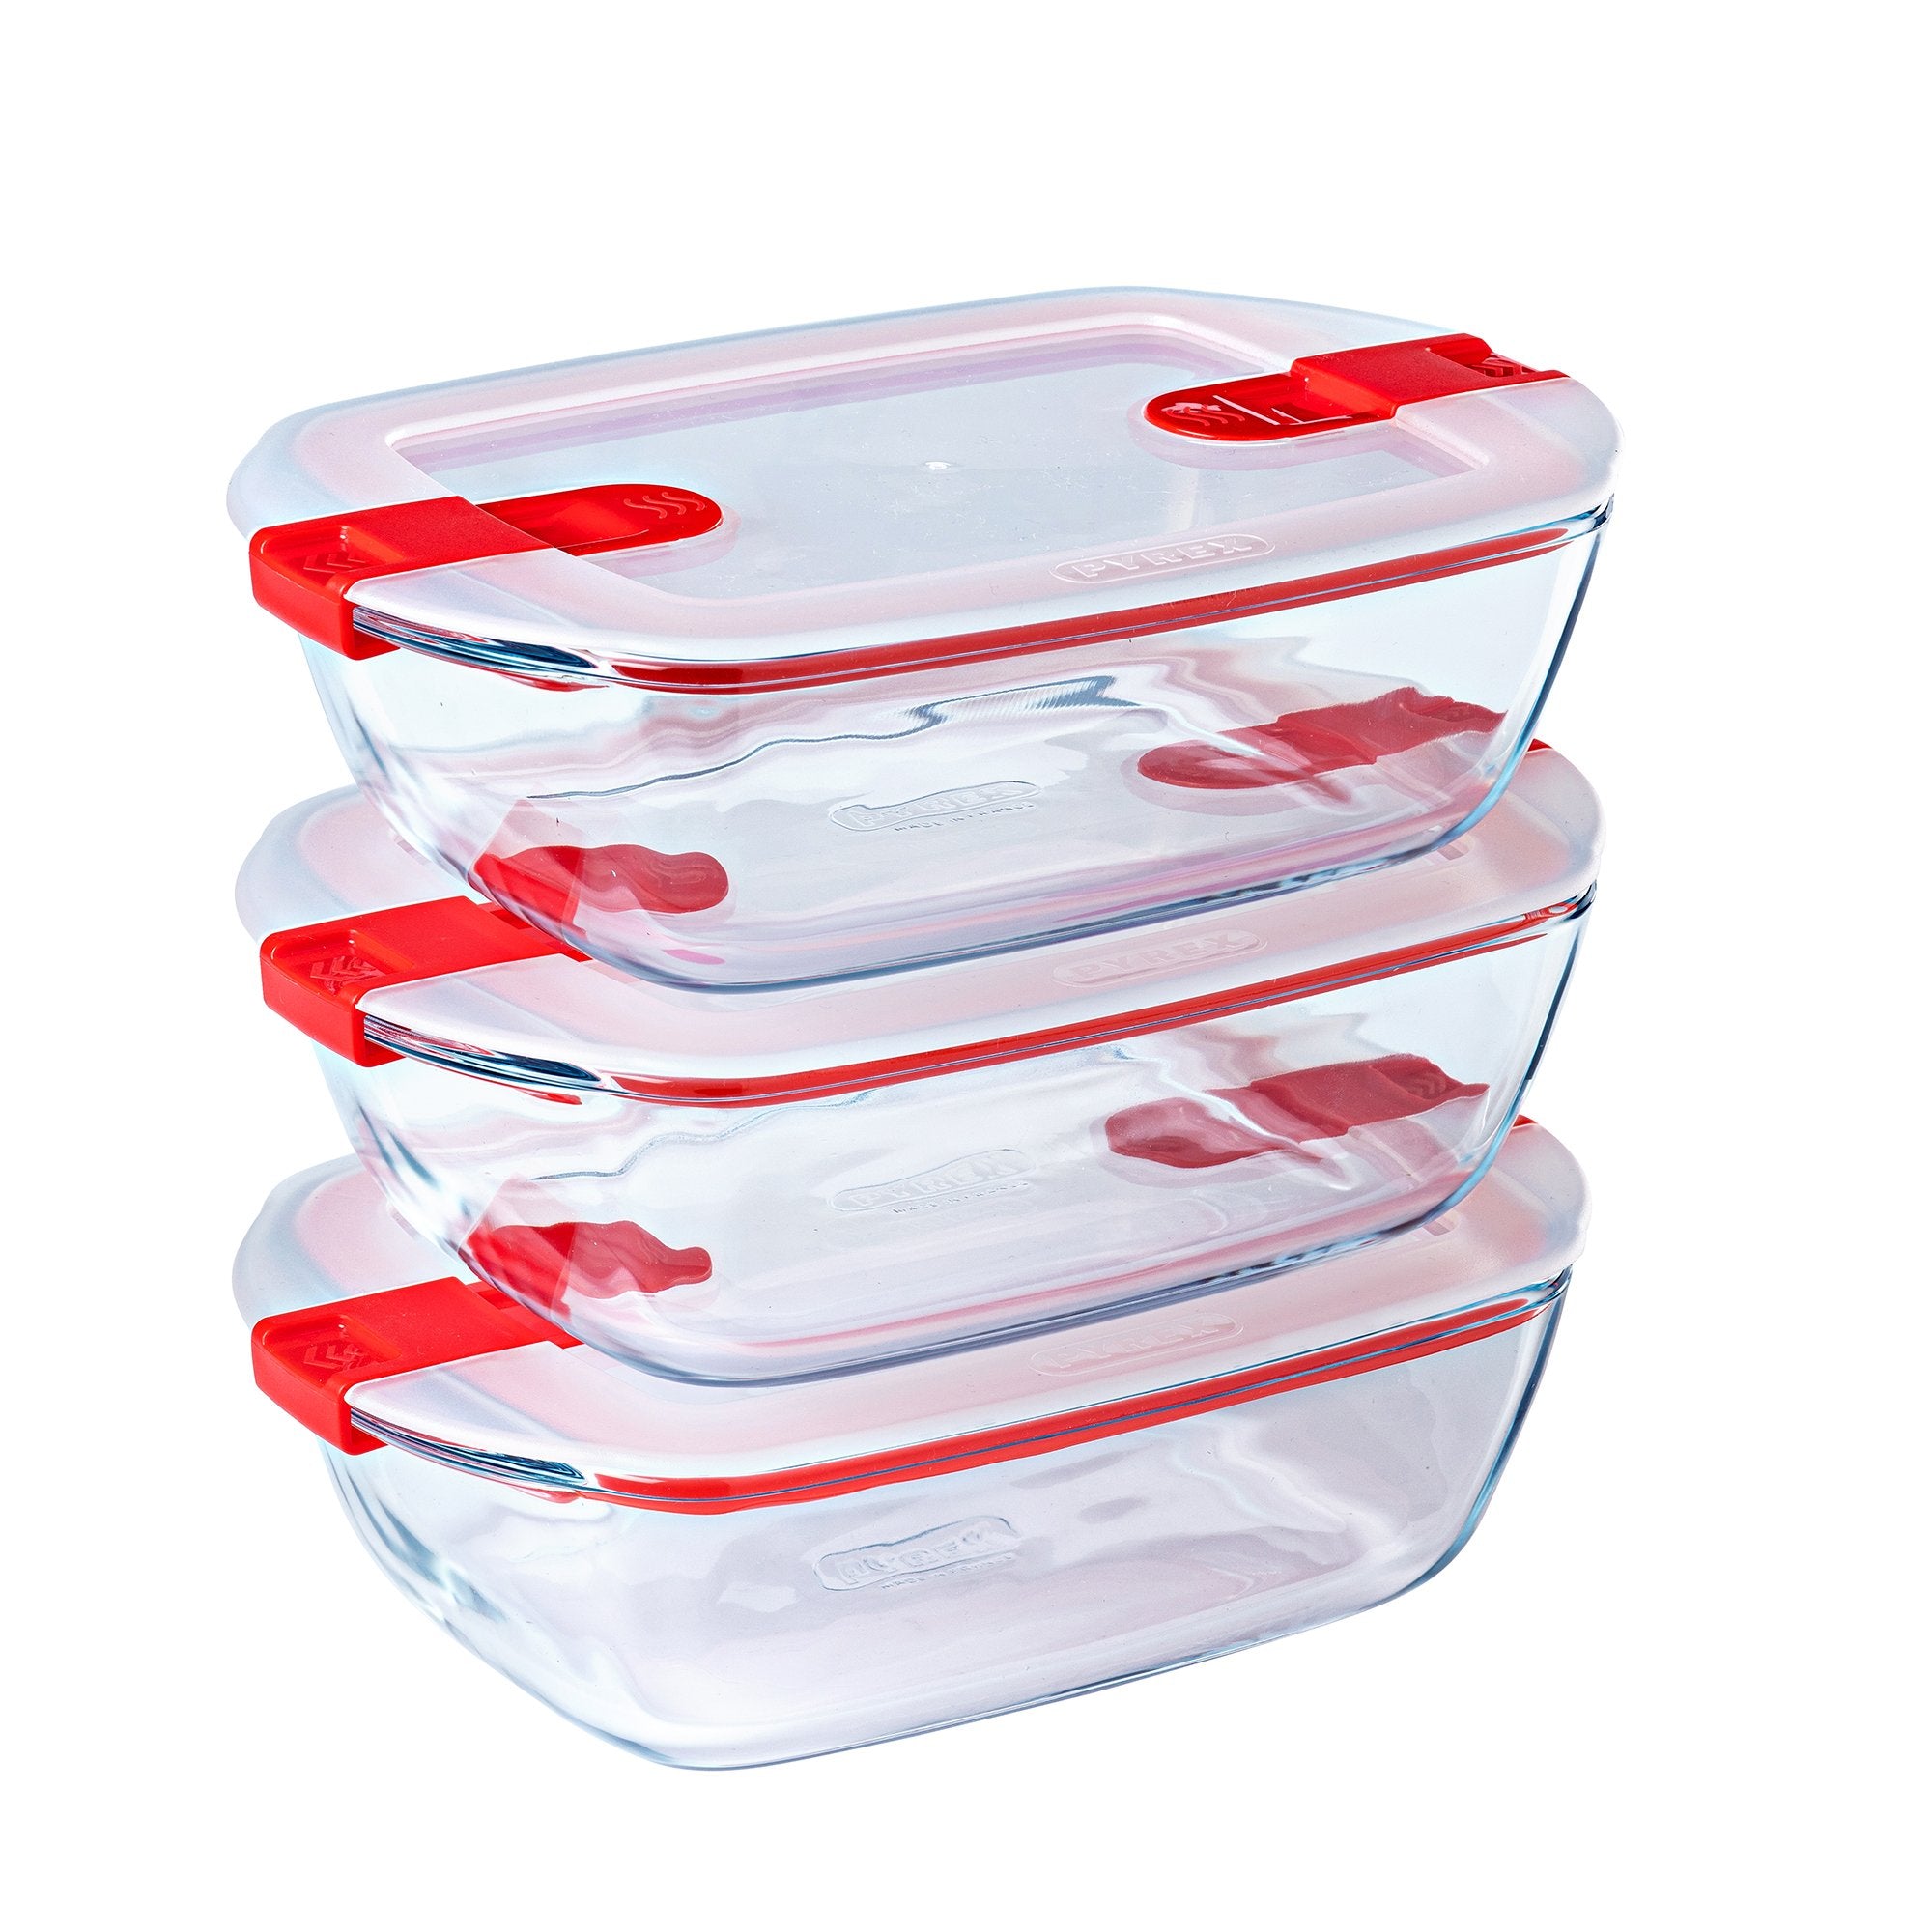 Set of 3 Rectangular Glass Food Containers 1.1 L with Airtight Lid for Microwaves